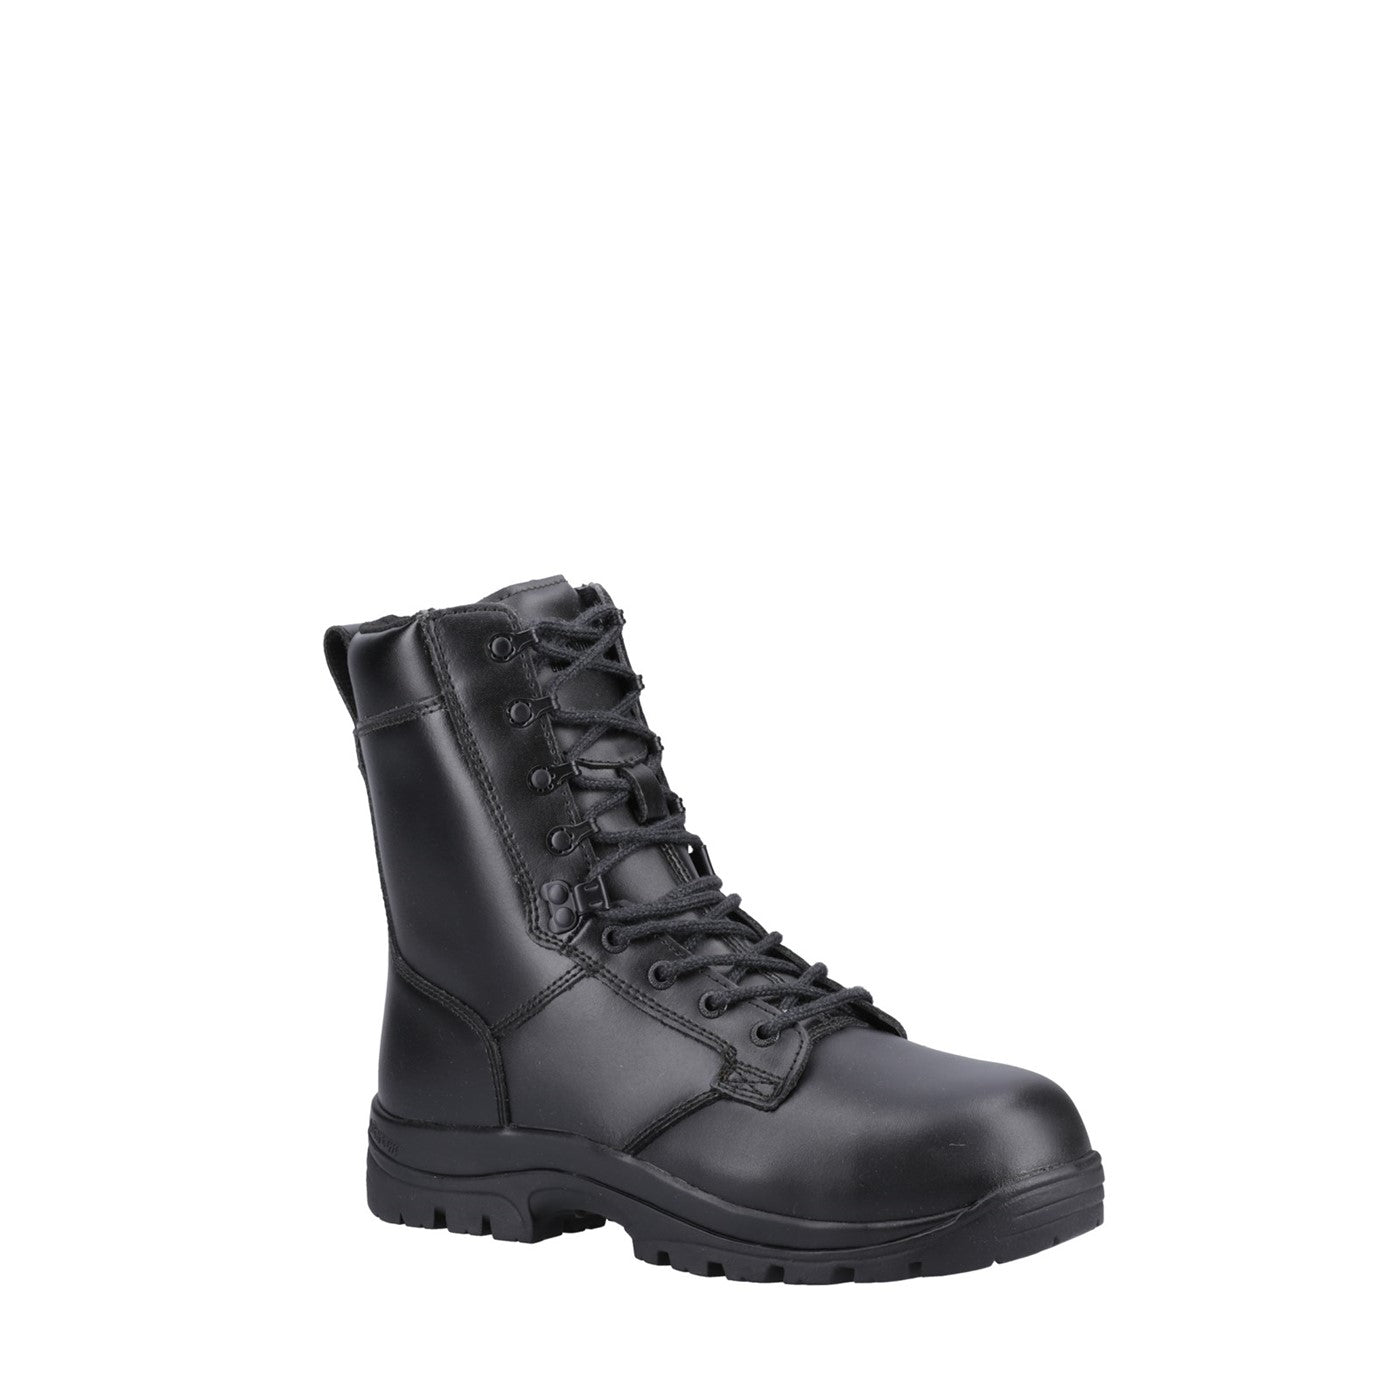 Elite Shield Safety Boots